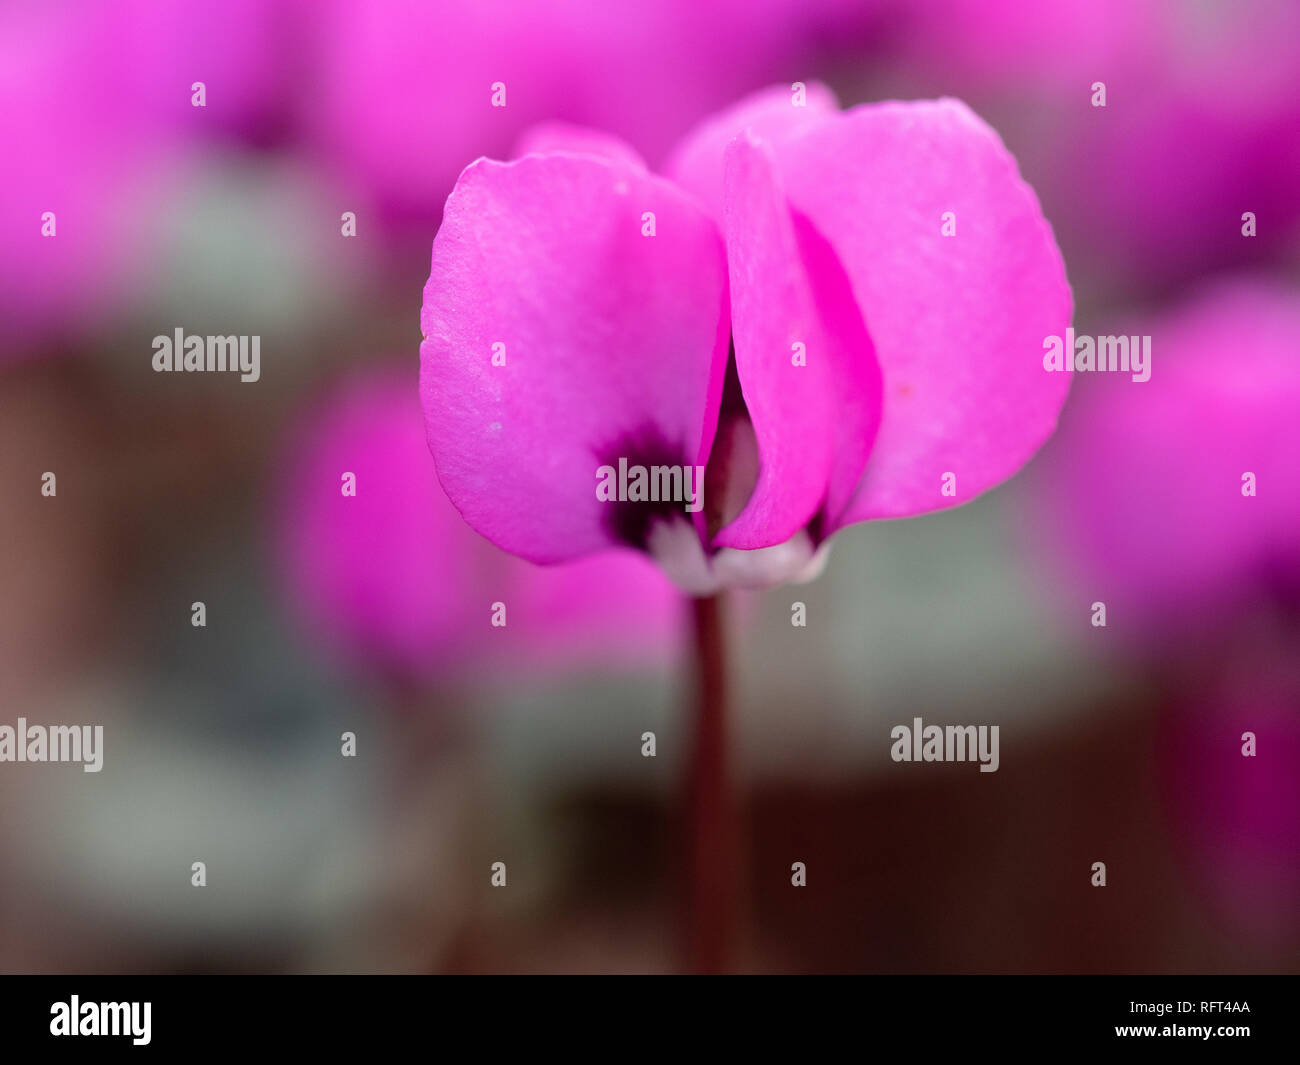 A close-up of a single magenta flower of Cyclamen with with out of focus Cyclamen flowers in the background Stock Photo